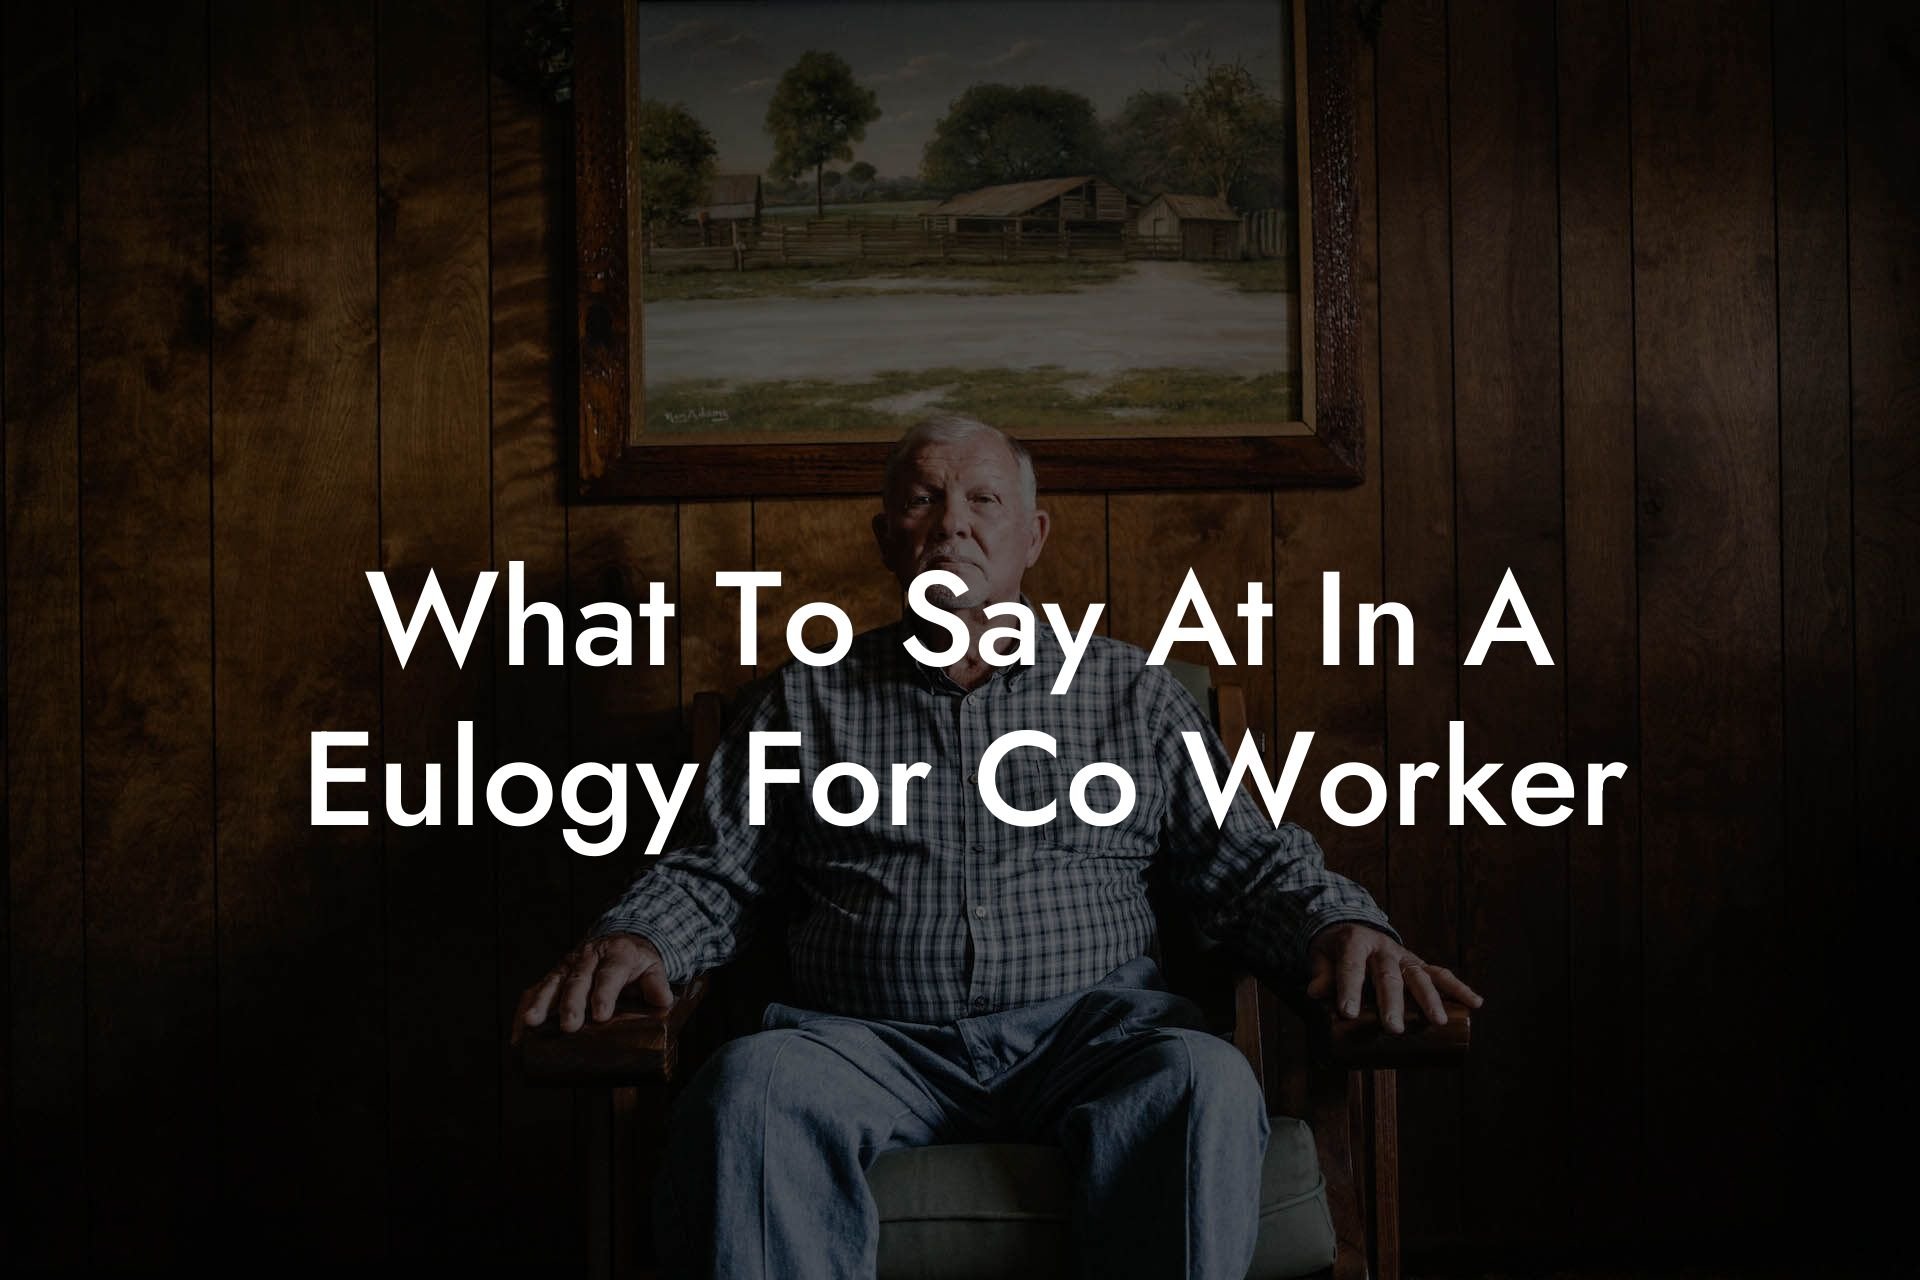 What To Say At In A Eulogy For Co Worker